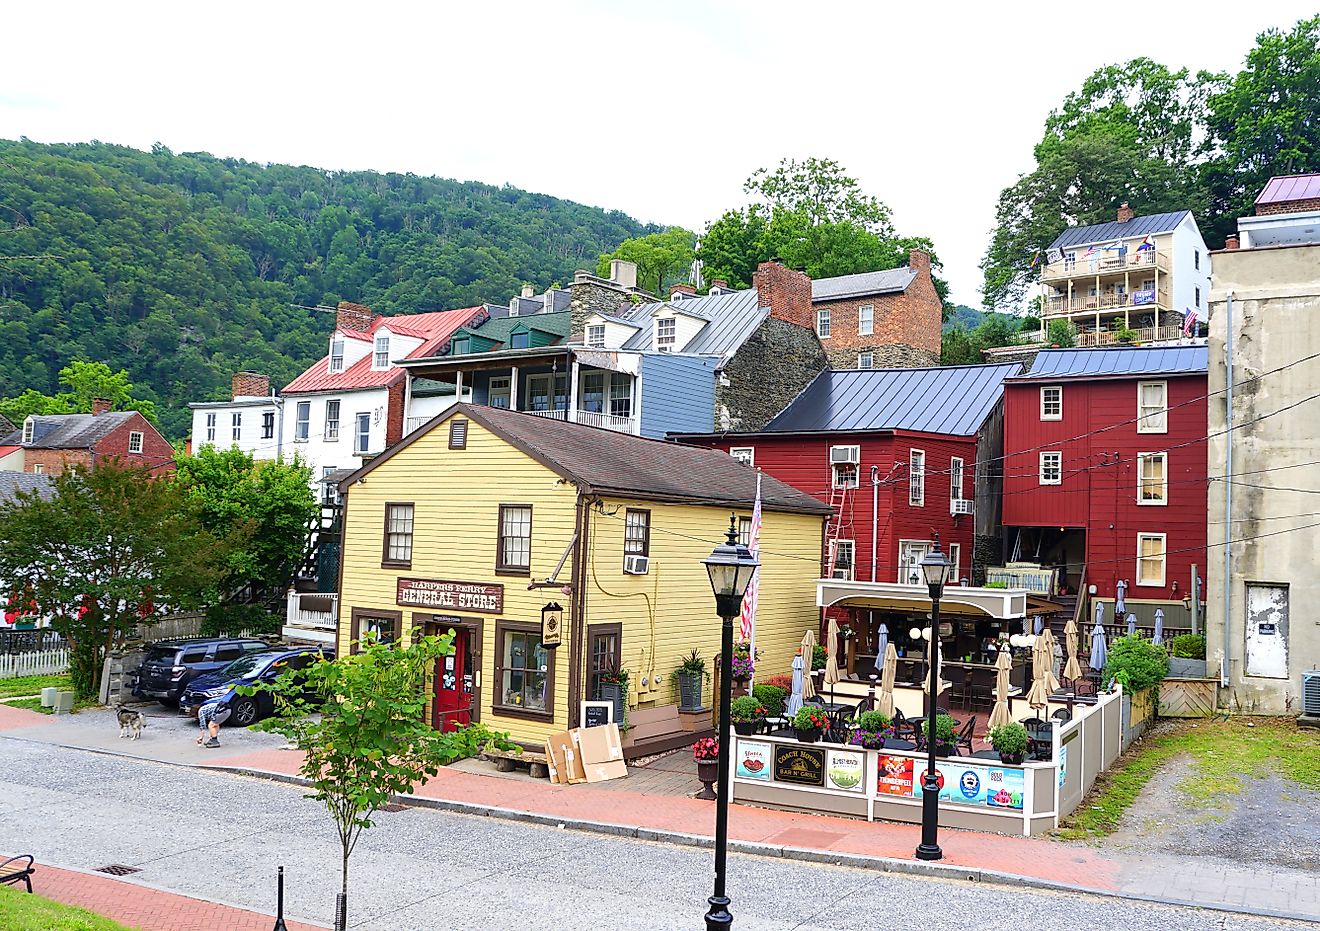 Harpers Ferry, West Virginia - The view of the residential and commercial buildings during the day